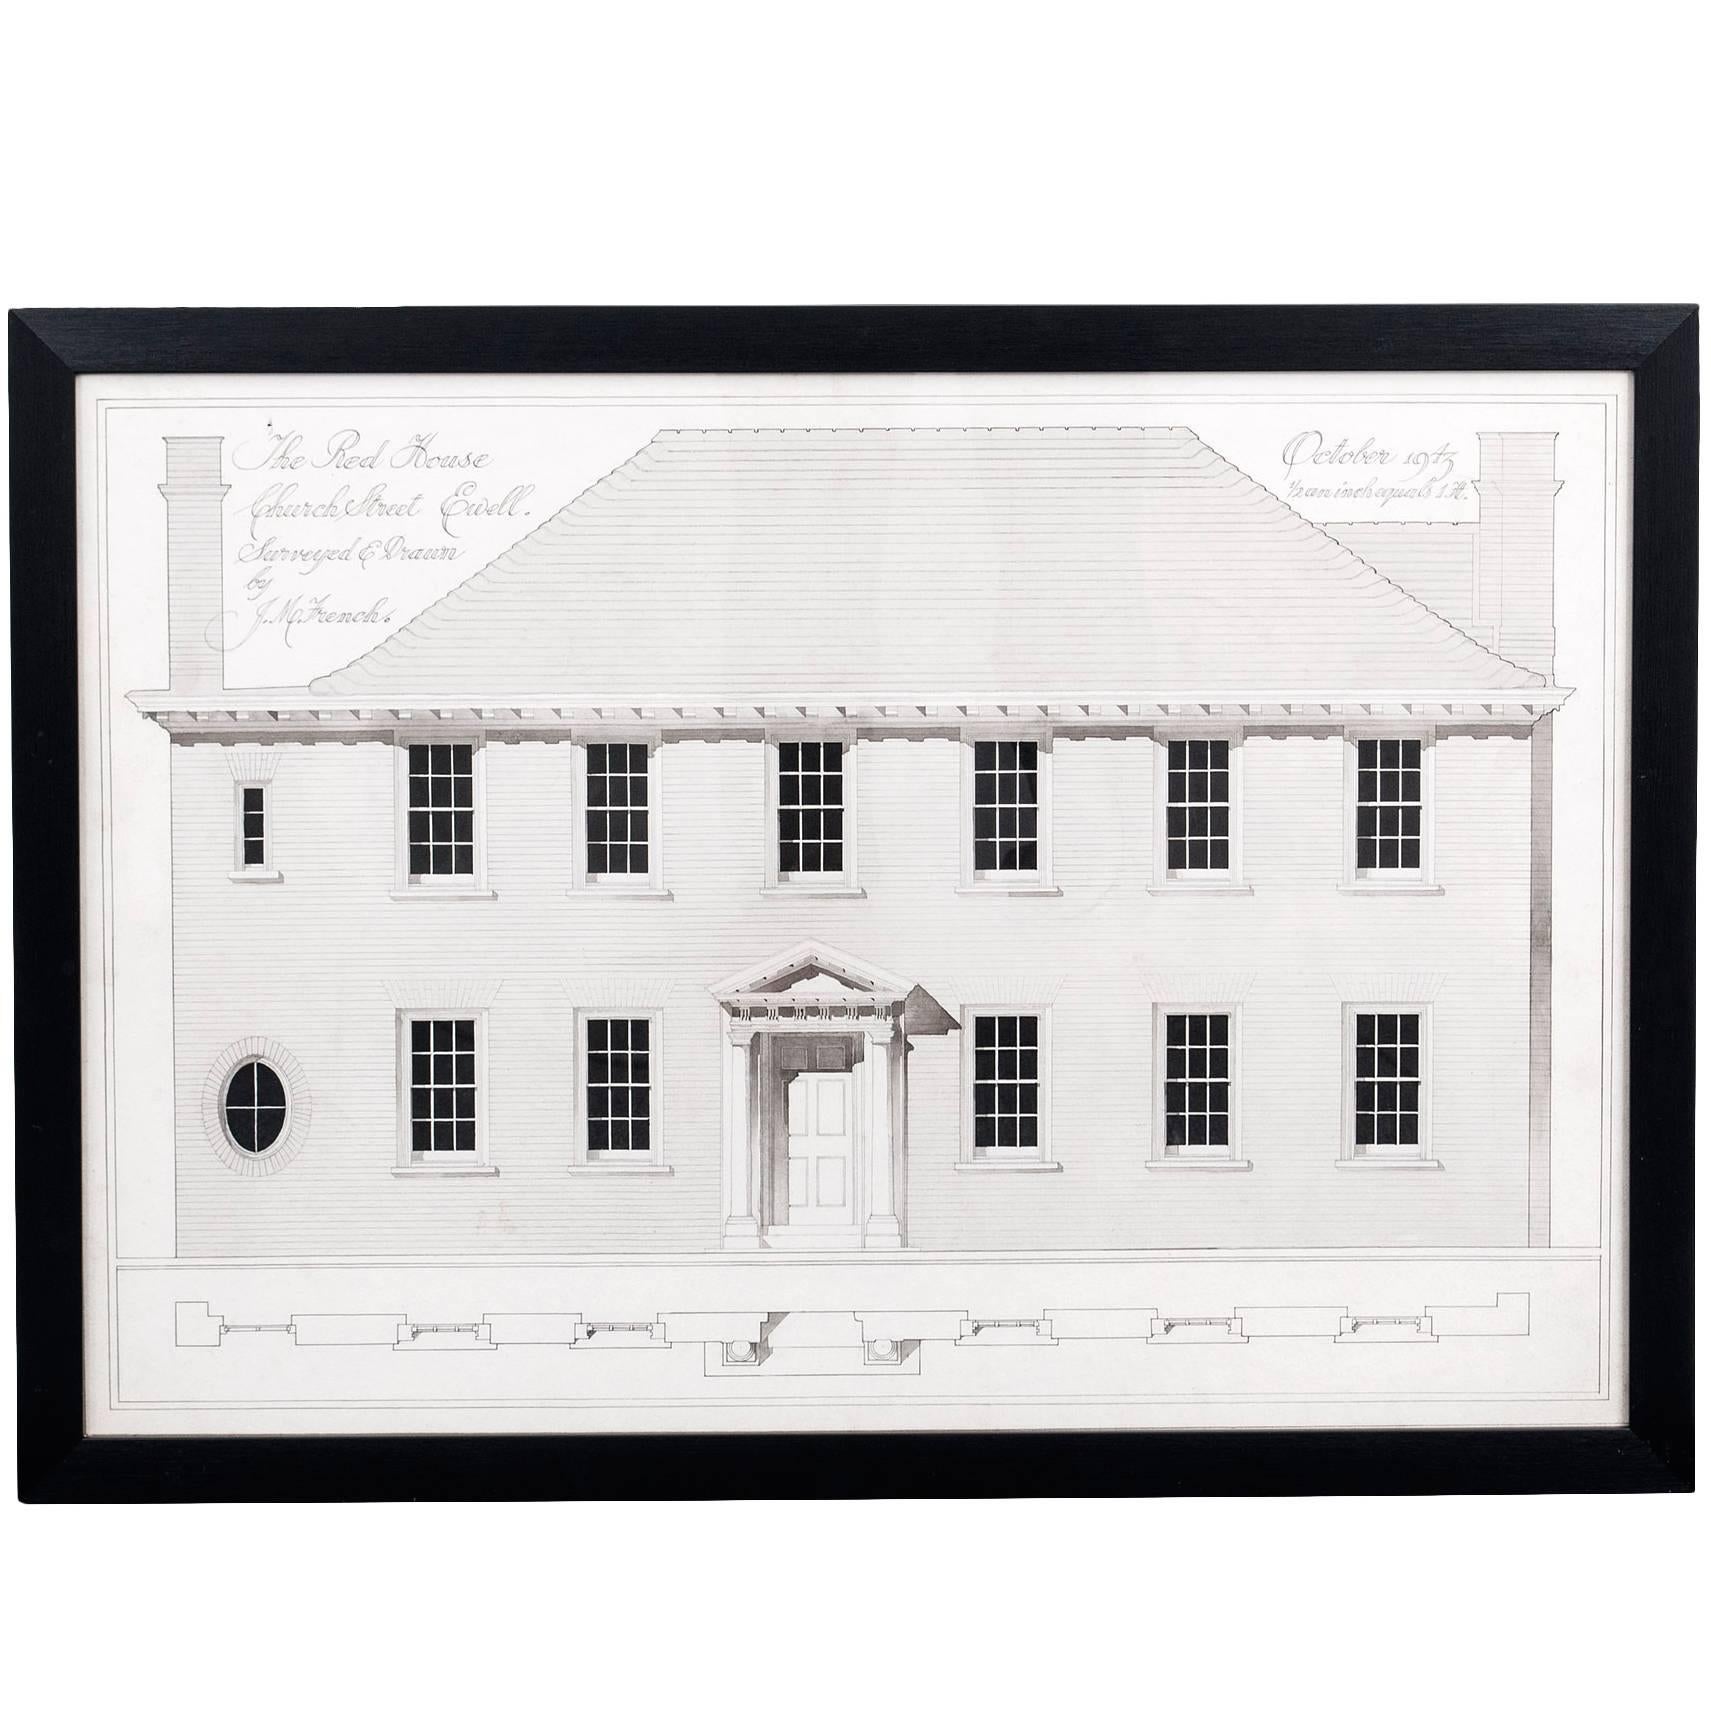 Framed Architectural Survey Drawing For Sale